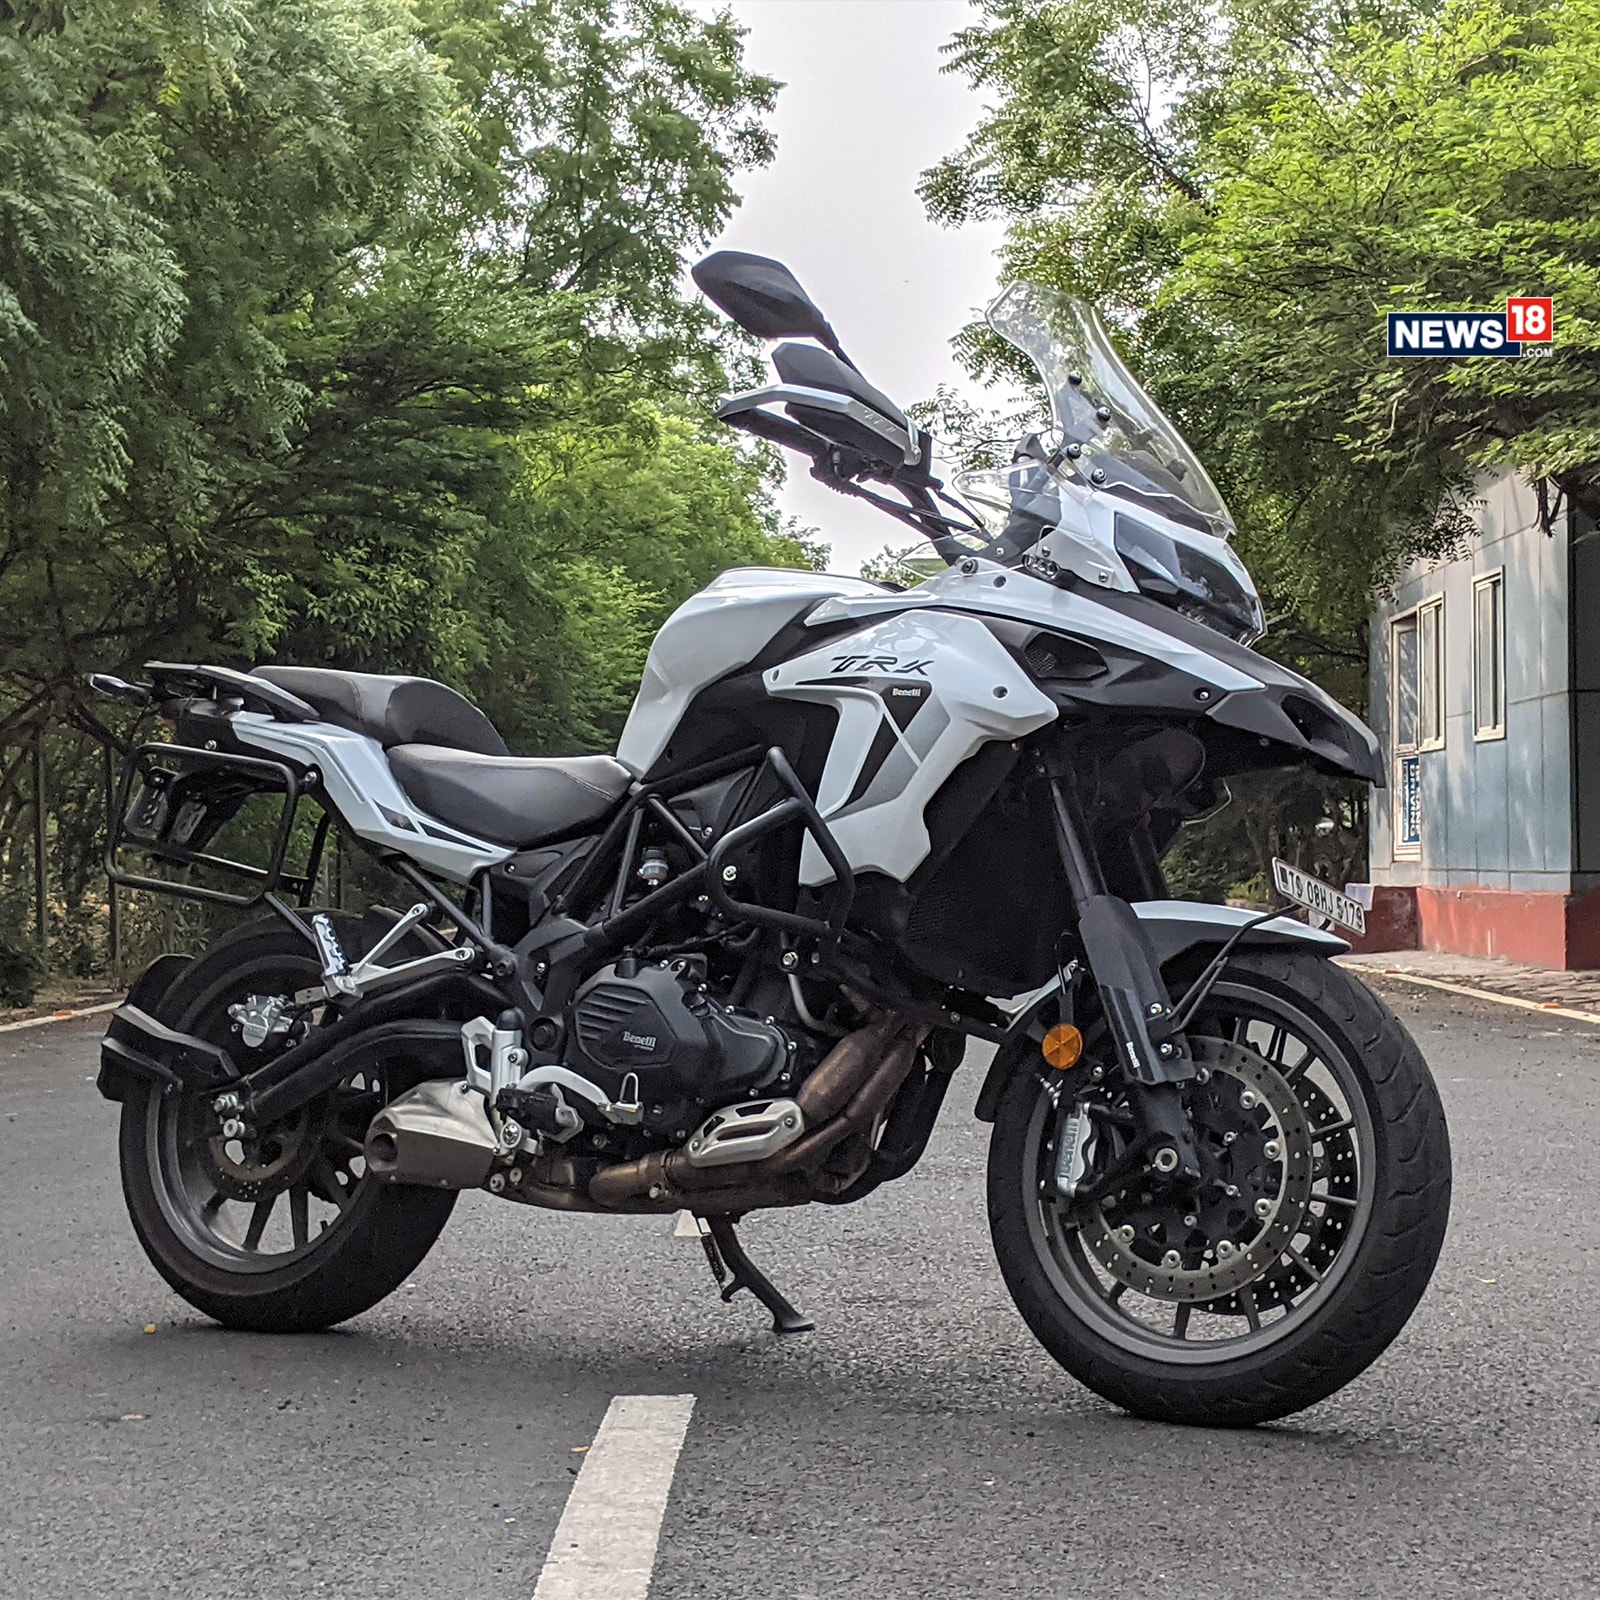 2021 Benelli TRK BS-VI Review: Getting that Big ADV in a